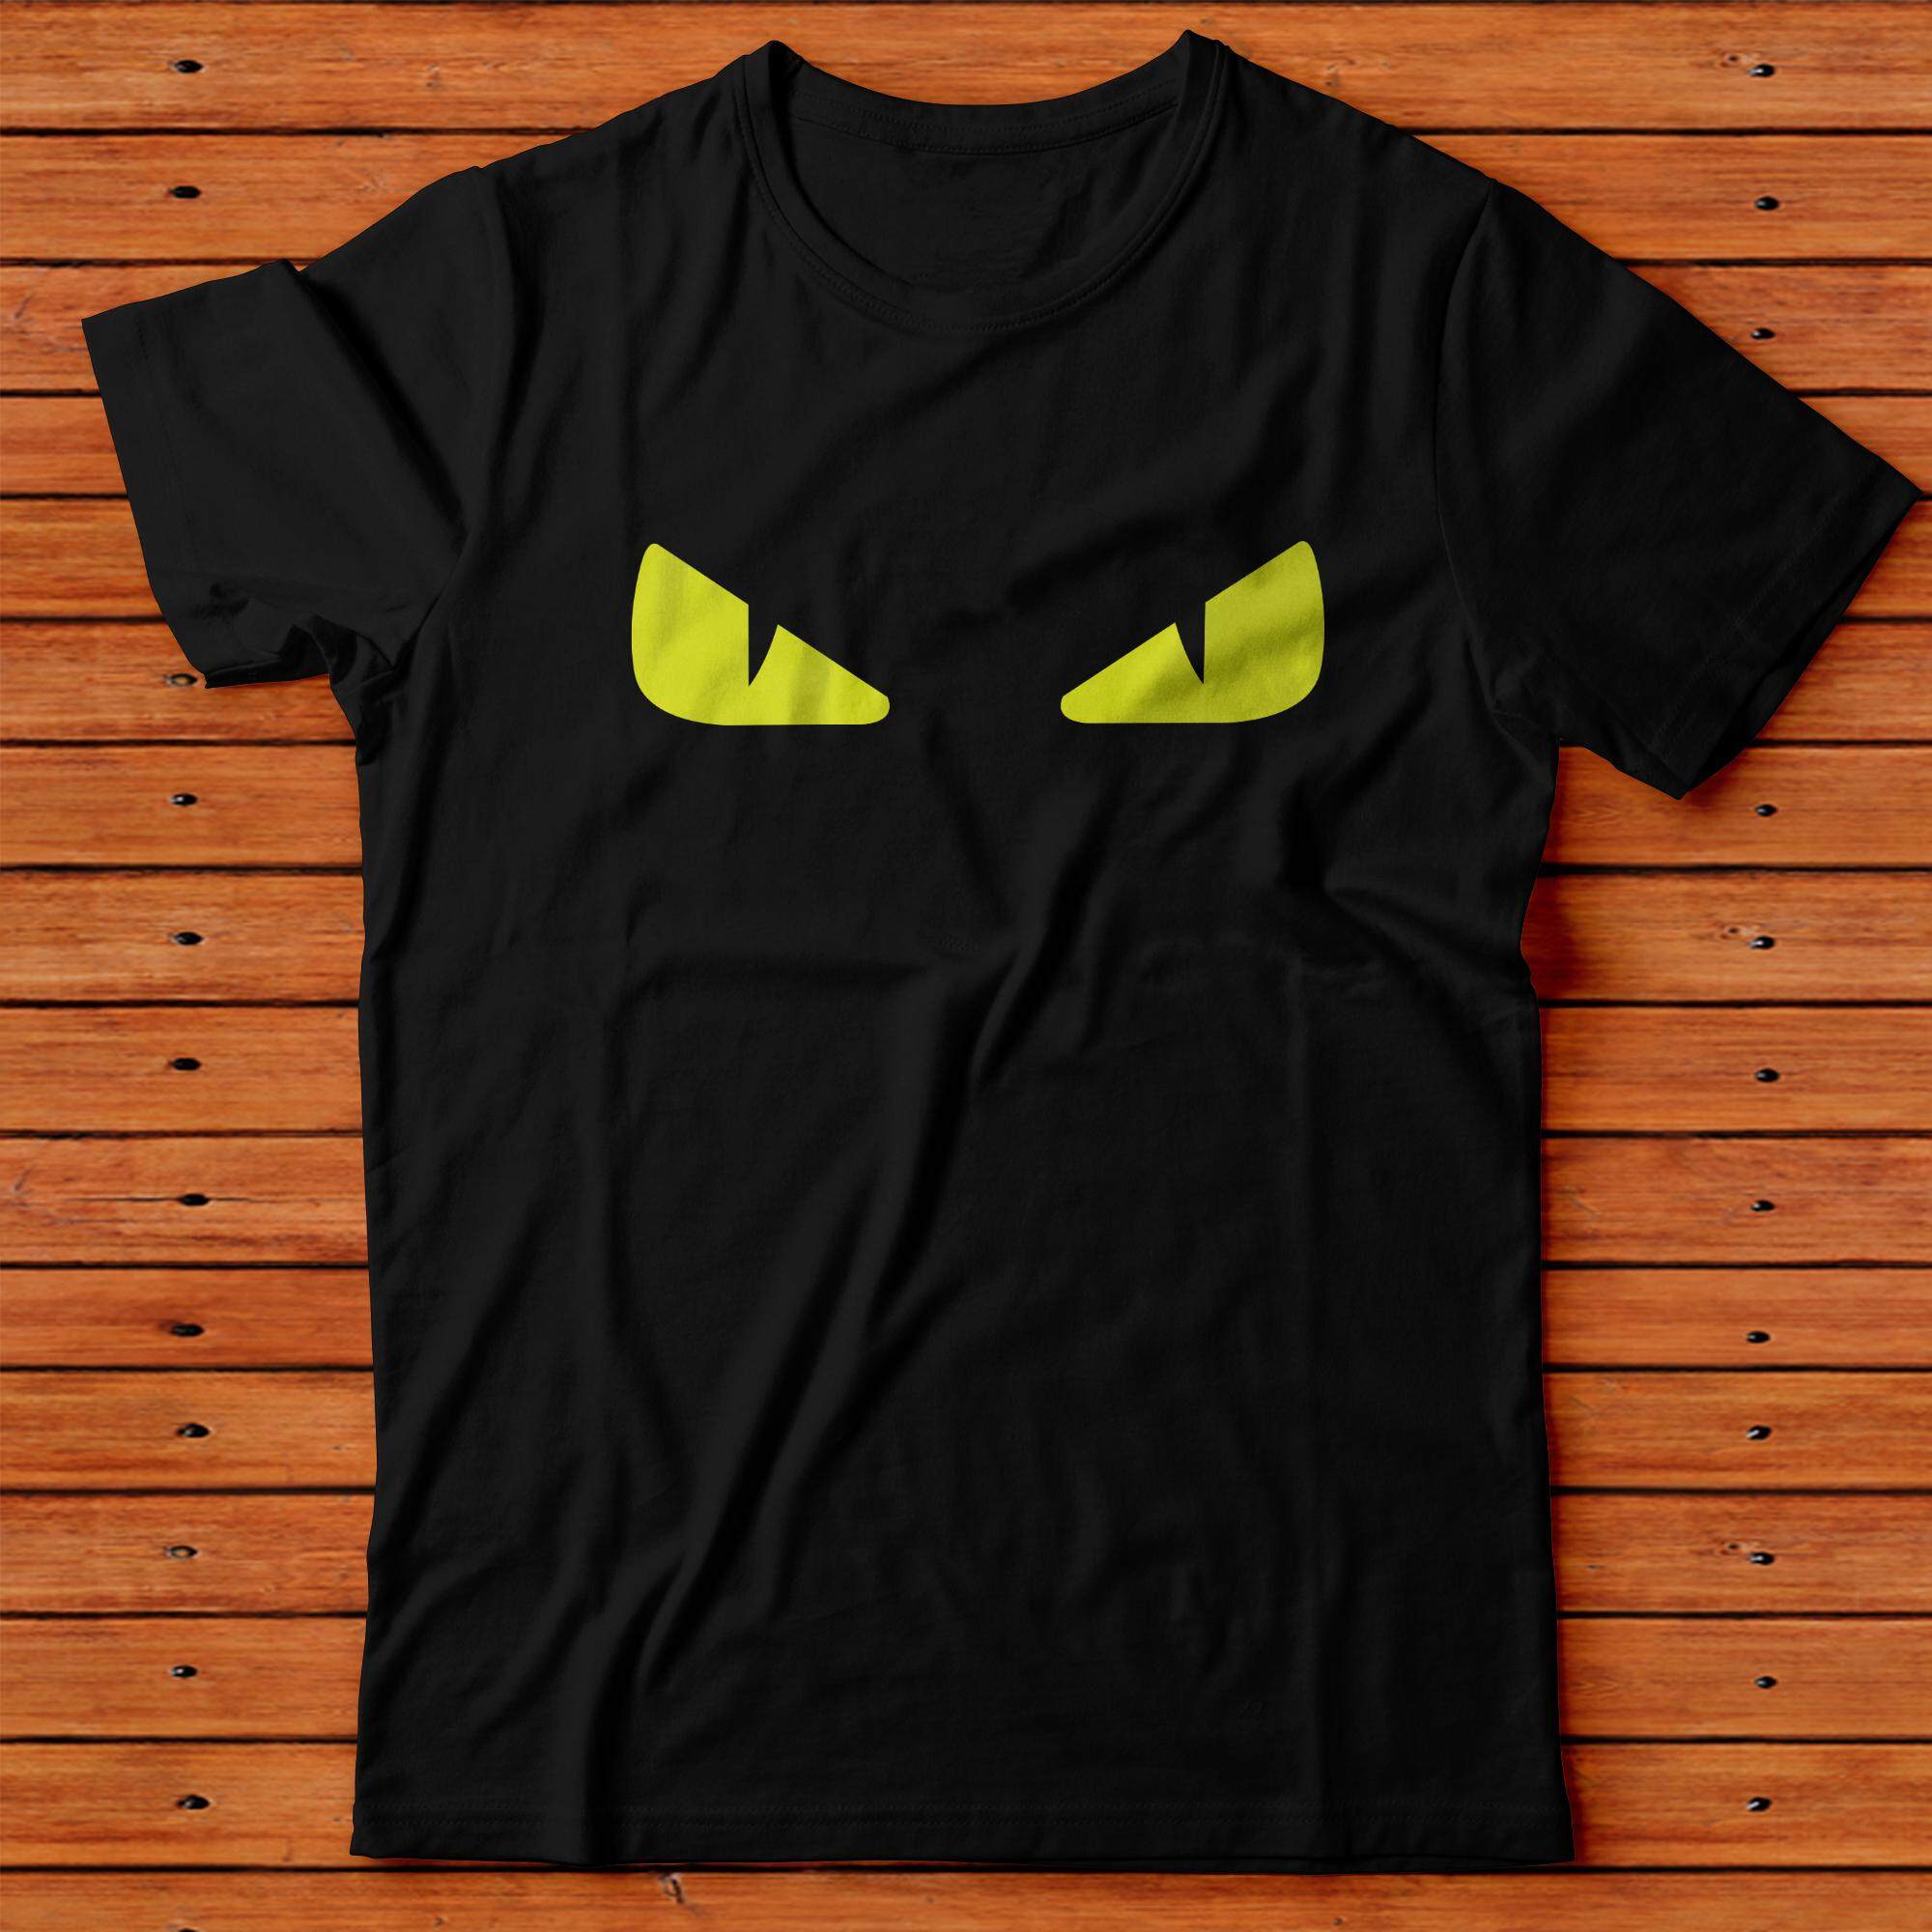 Custom T Shirt Products For The Best Prices In Malaysia